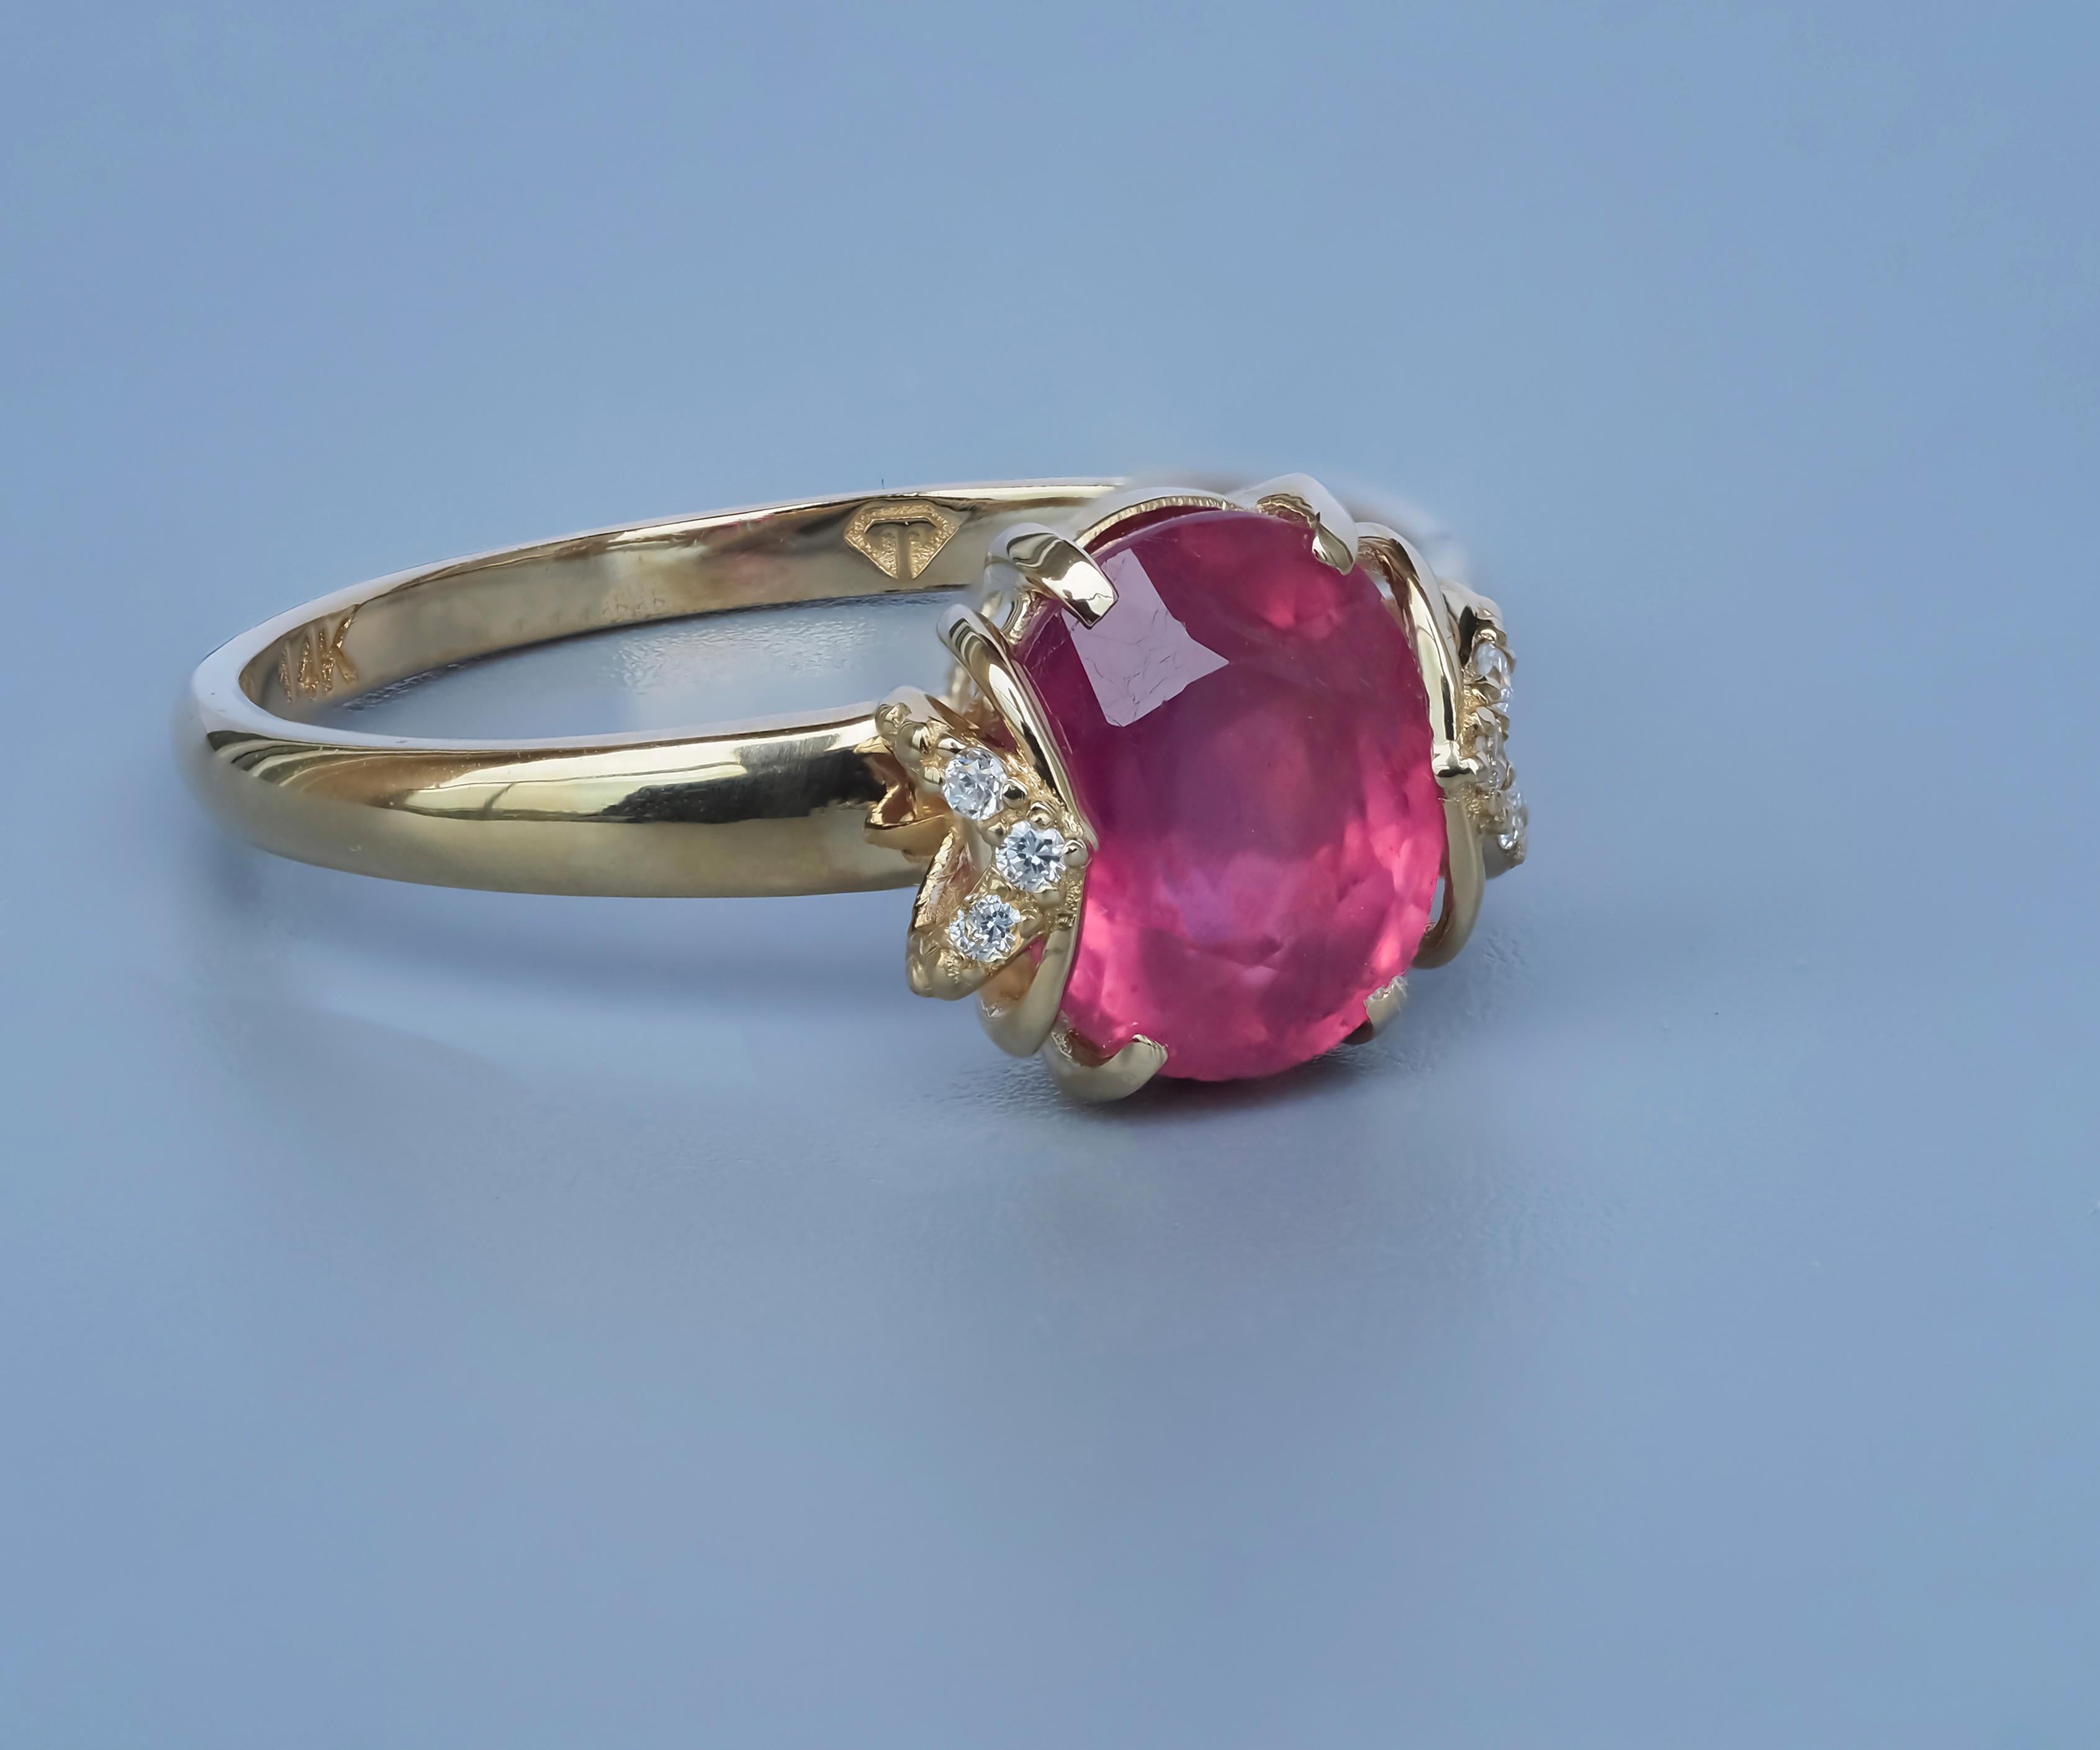 For Sale:  14 Karat Gold Ring with Ruby and Diamonds. Oval ruby ring! 4